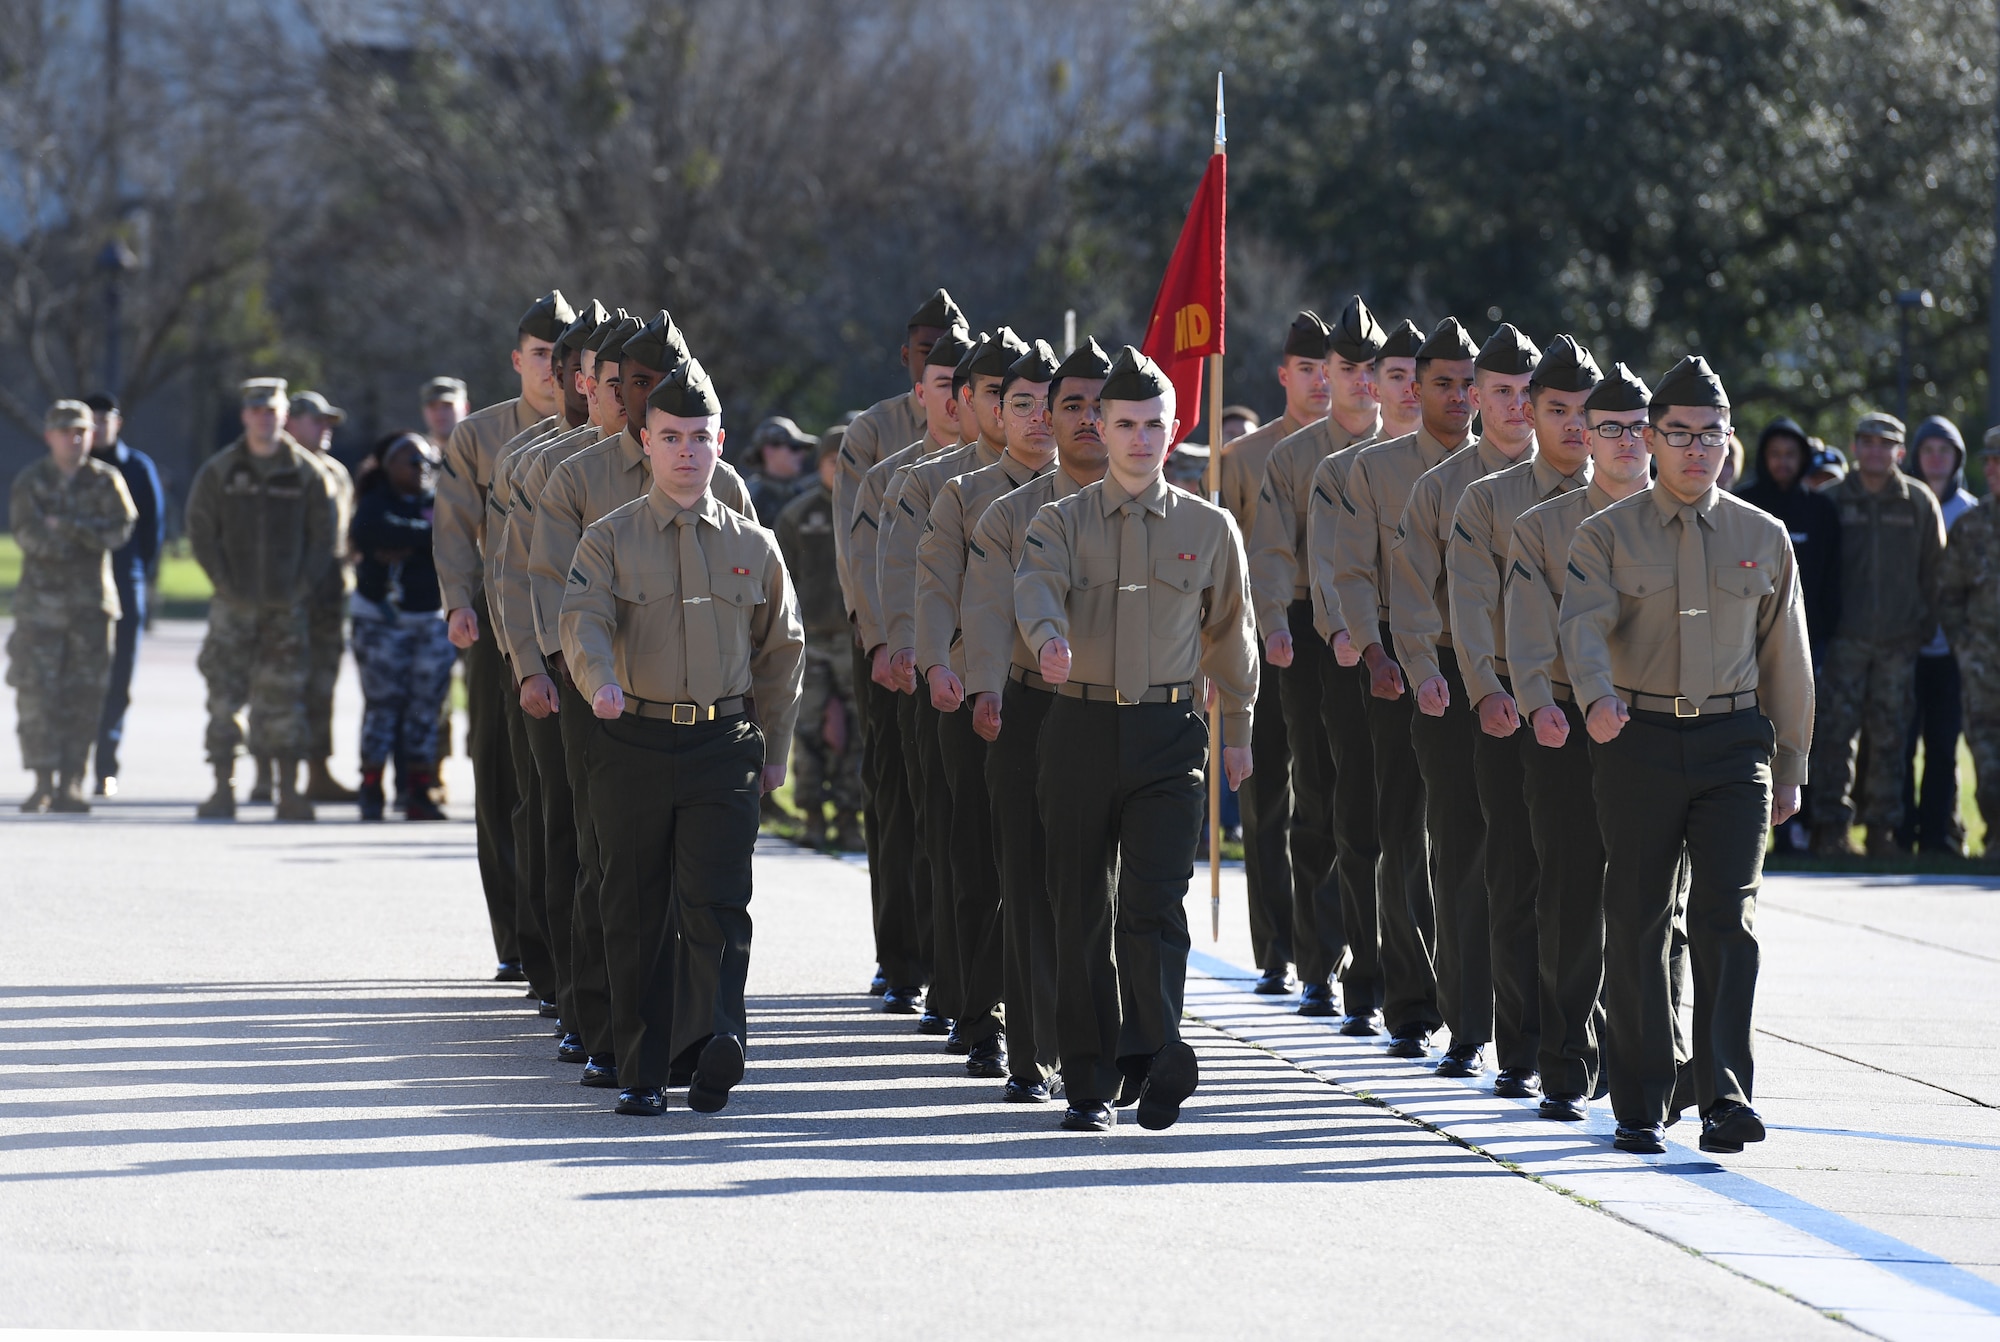 Members of the Keesler Marine Detachment regulation drill team perform during the 81st Training Group drill down on the Levitow Training Support Facility drill pad at Keesler Air Force Base, Mississippi, Feb. 23, 2023.